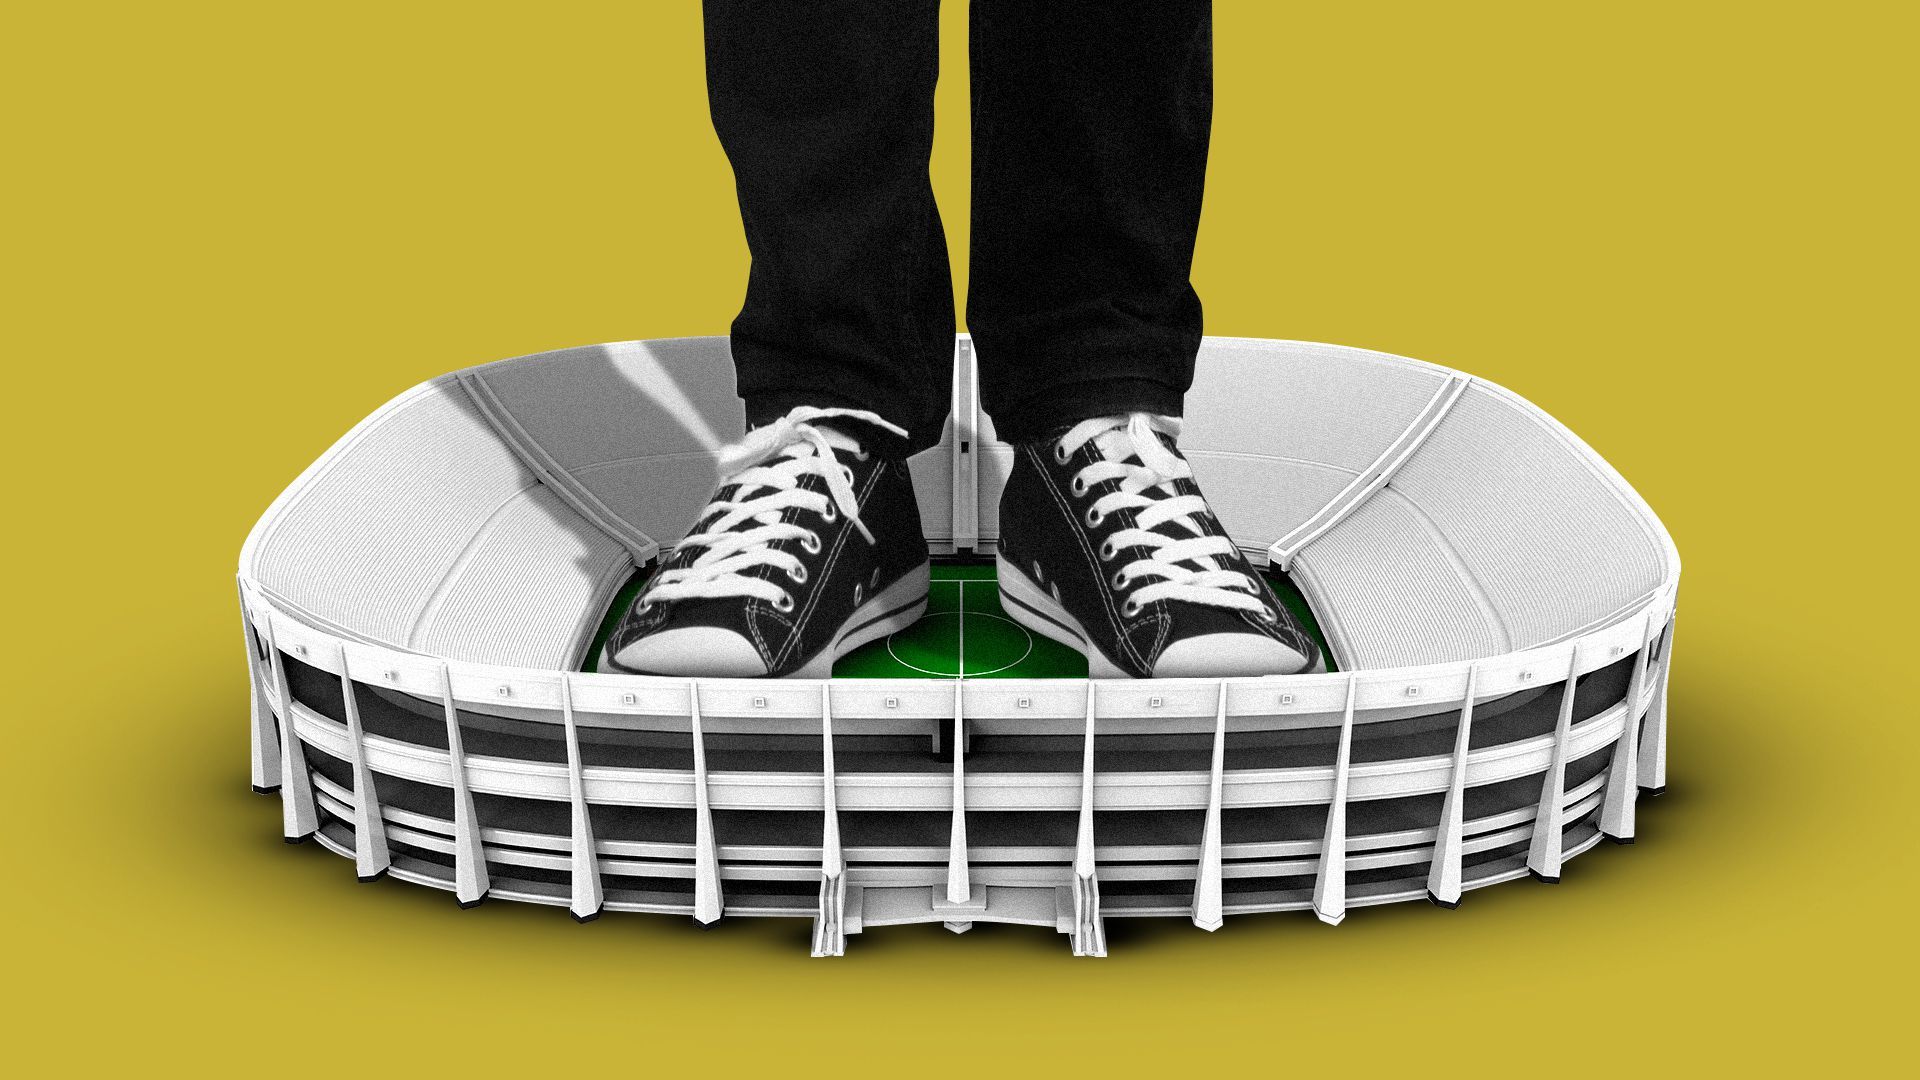 Illustration of a giant pair of legs standing in a tiny stadium